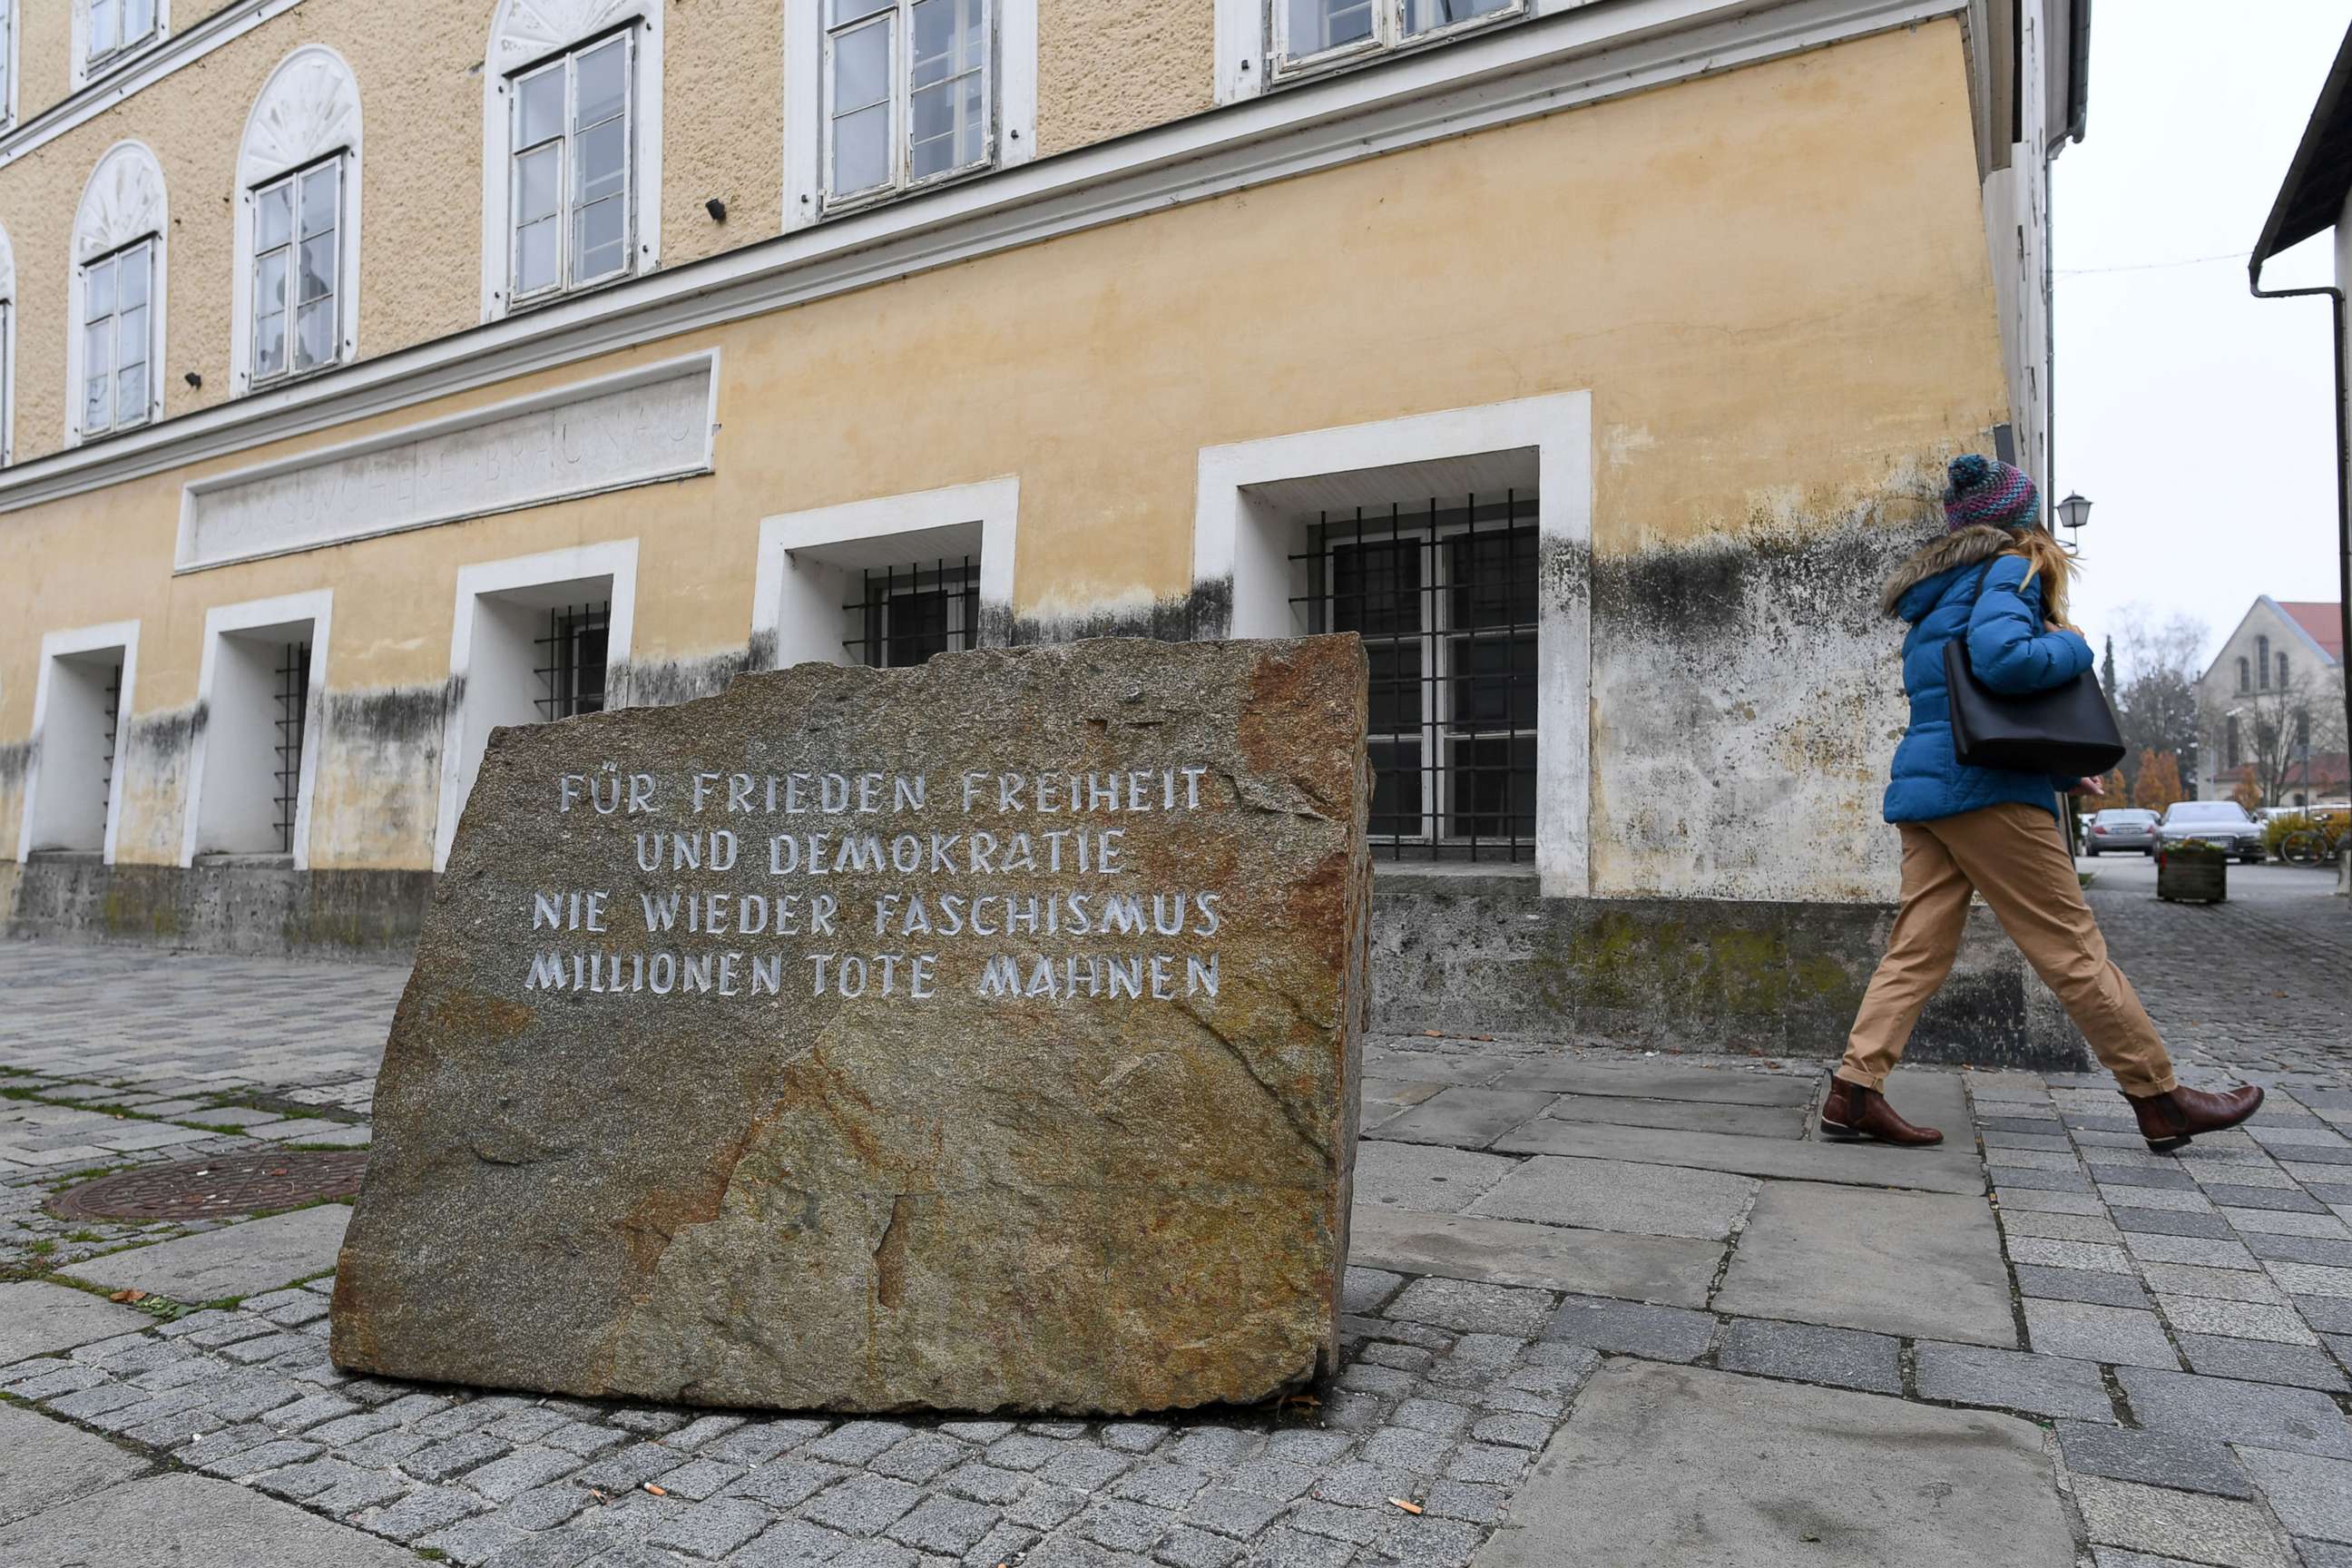 PHOTO: A woman walks past a memorial reading "For peace, liberty and democracy. Never again Fascism" in front the house where Adolf Hitler was born, in Braunau, Austria, Nov. 20, 2019.